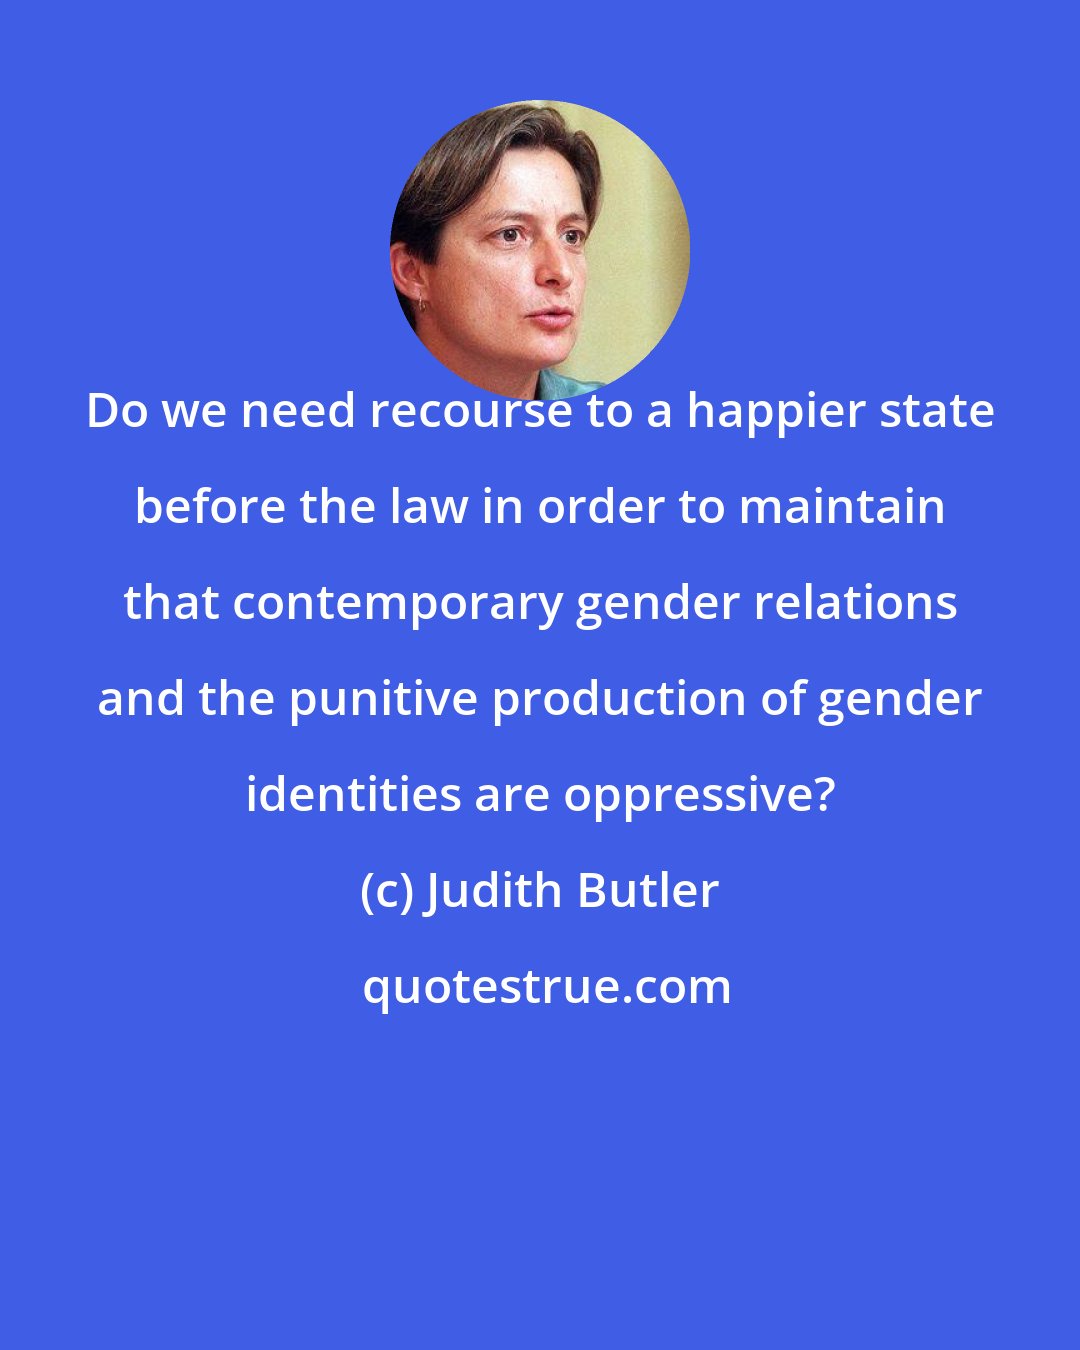 Judith Butler: Do we need recourse to a happier state before the law in order to maintain that contemporary gender relations and the punitive production of gender identities are oppressive?